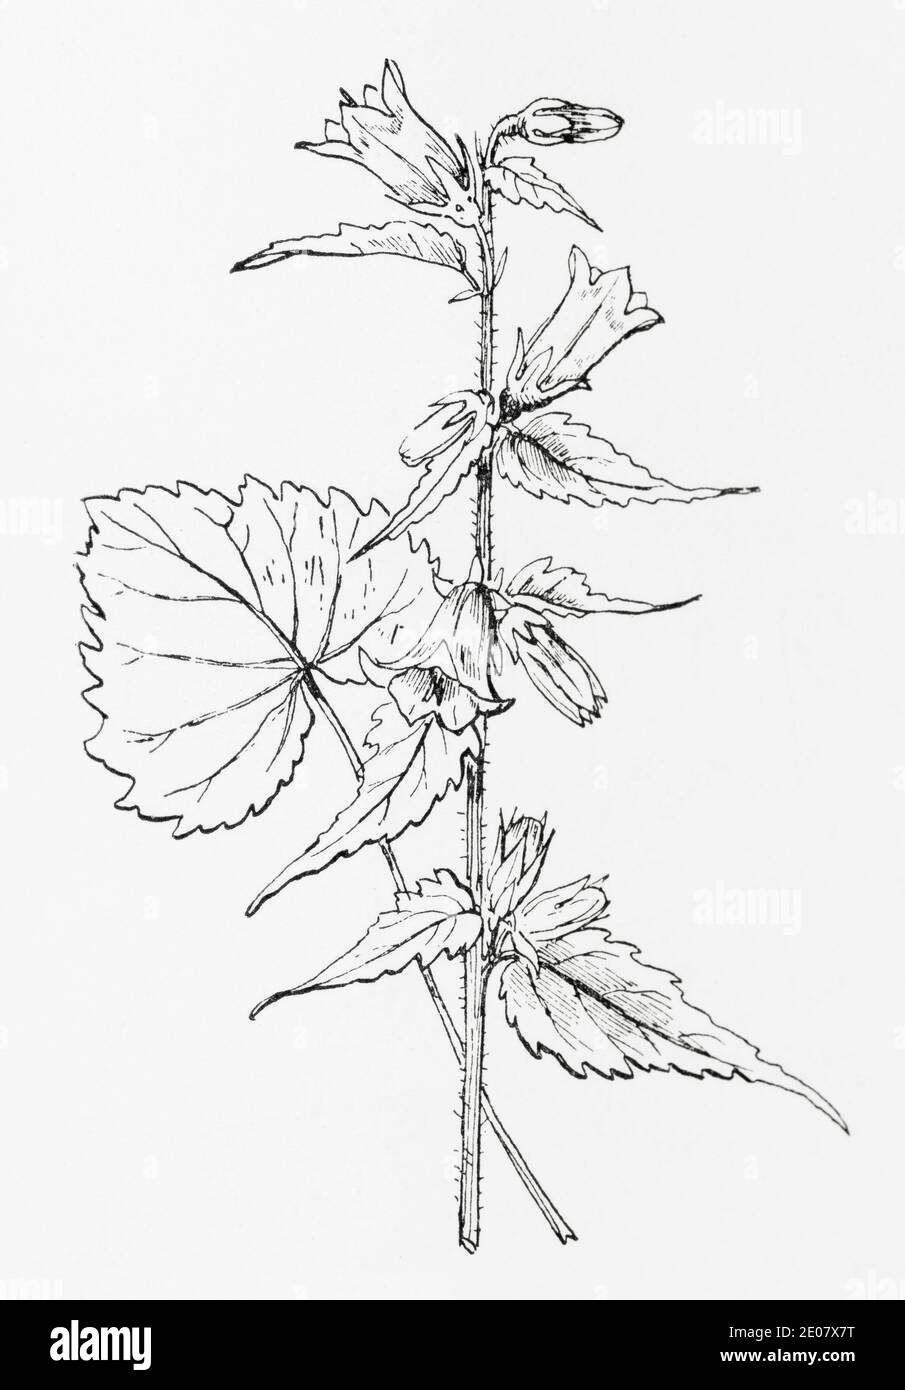 Old botanical illustration engraving of Nettle-leaved Bell Flower / Campanula trachelium. Traditional medicinal herbal plant. See Notes Stock Photo